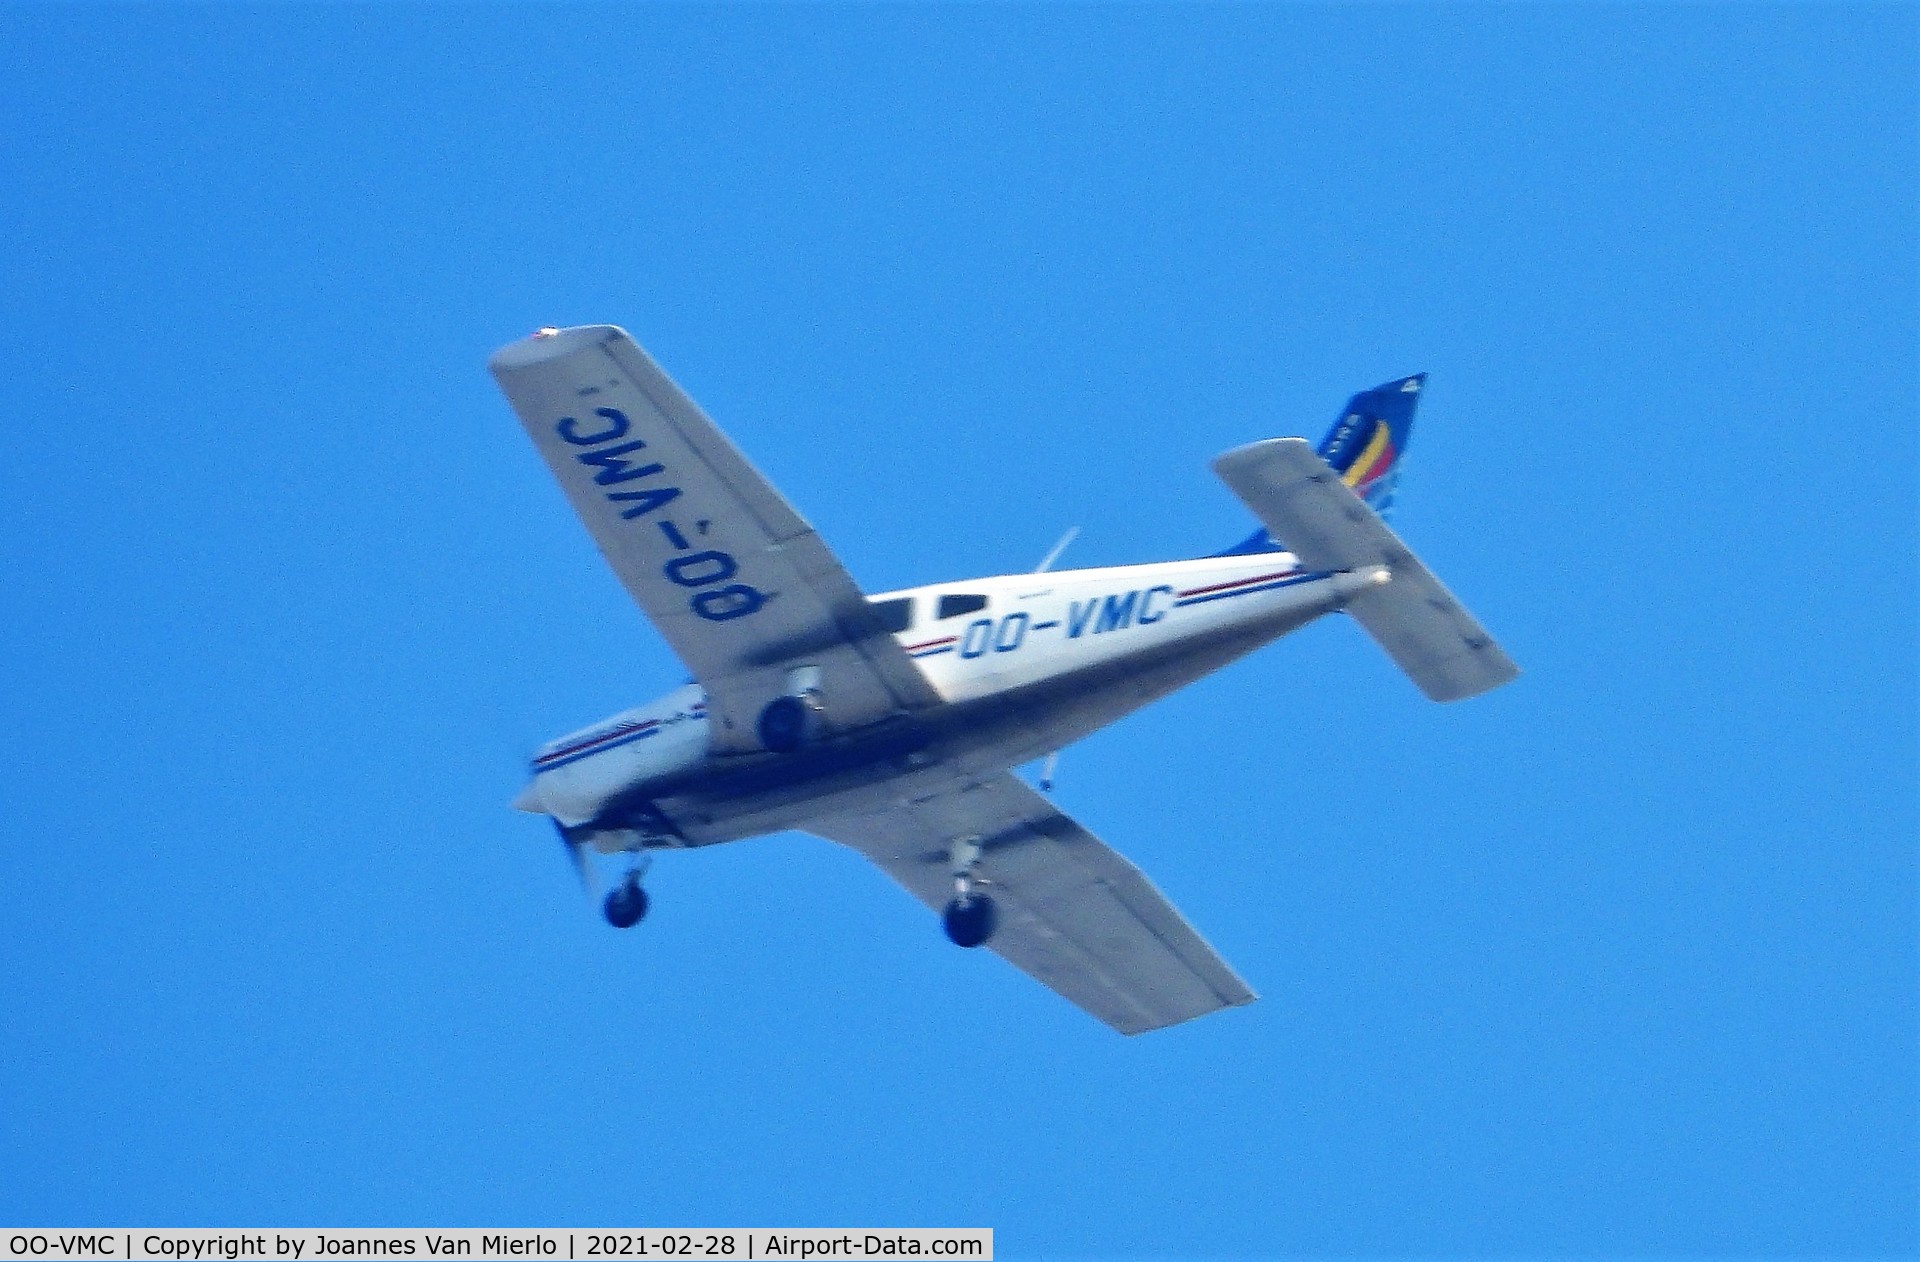 OO-VMC, 1996 Piper PA-28-161 C/N 2842016, Over Ghent, Belgium